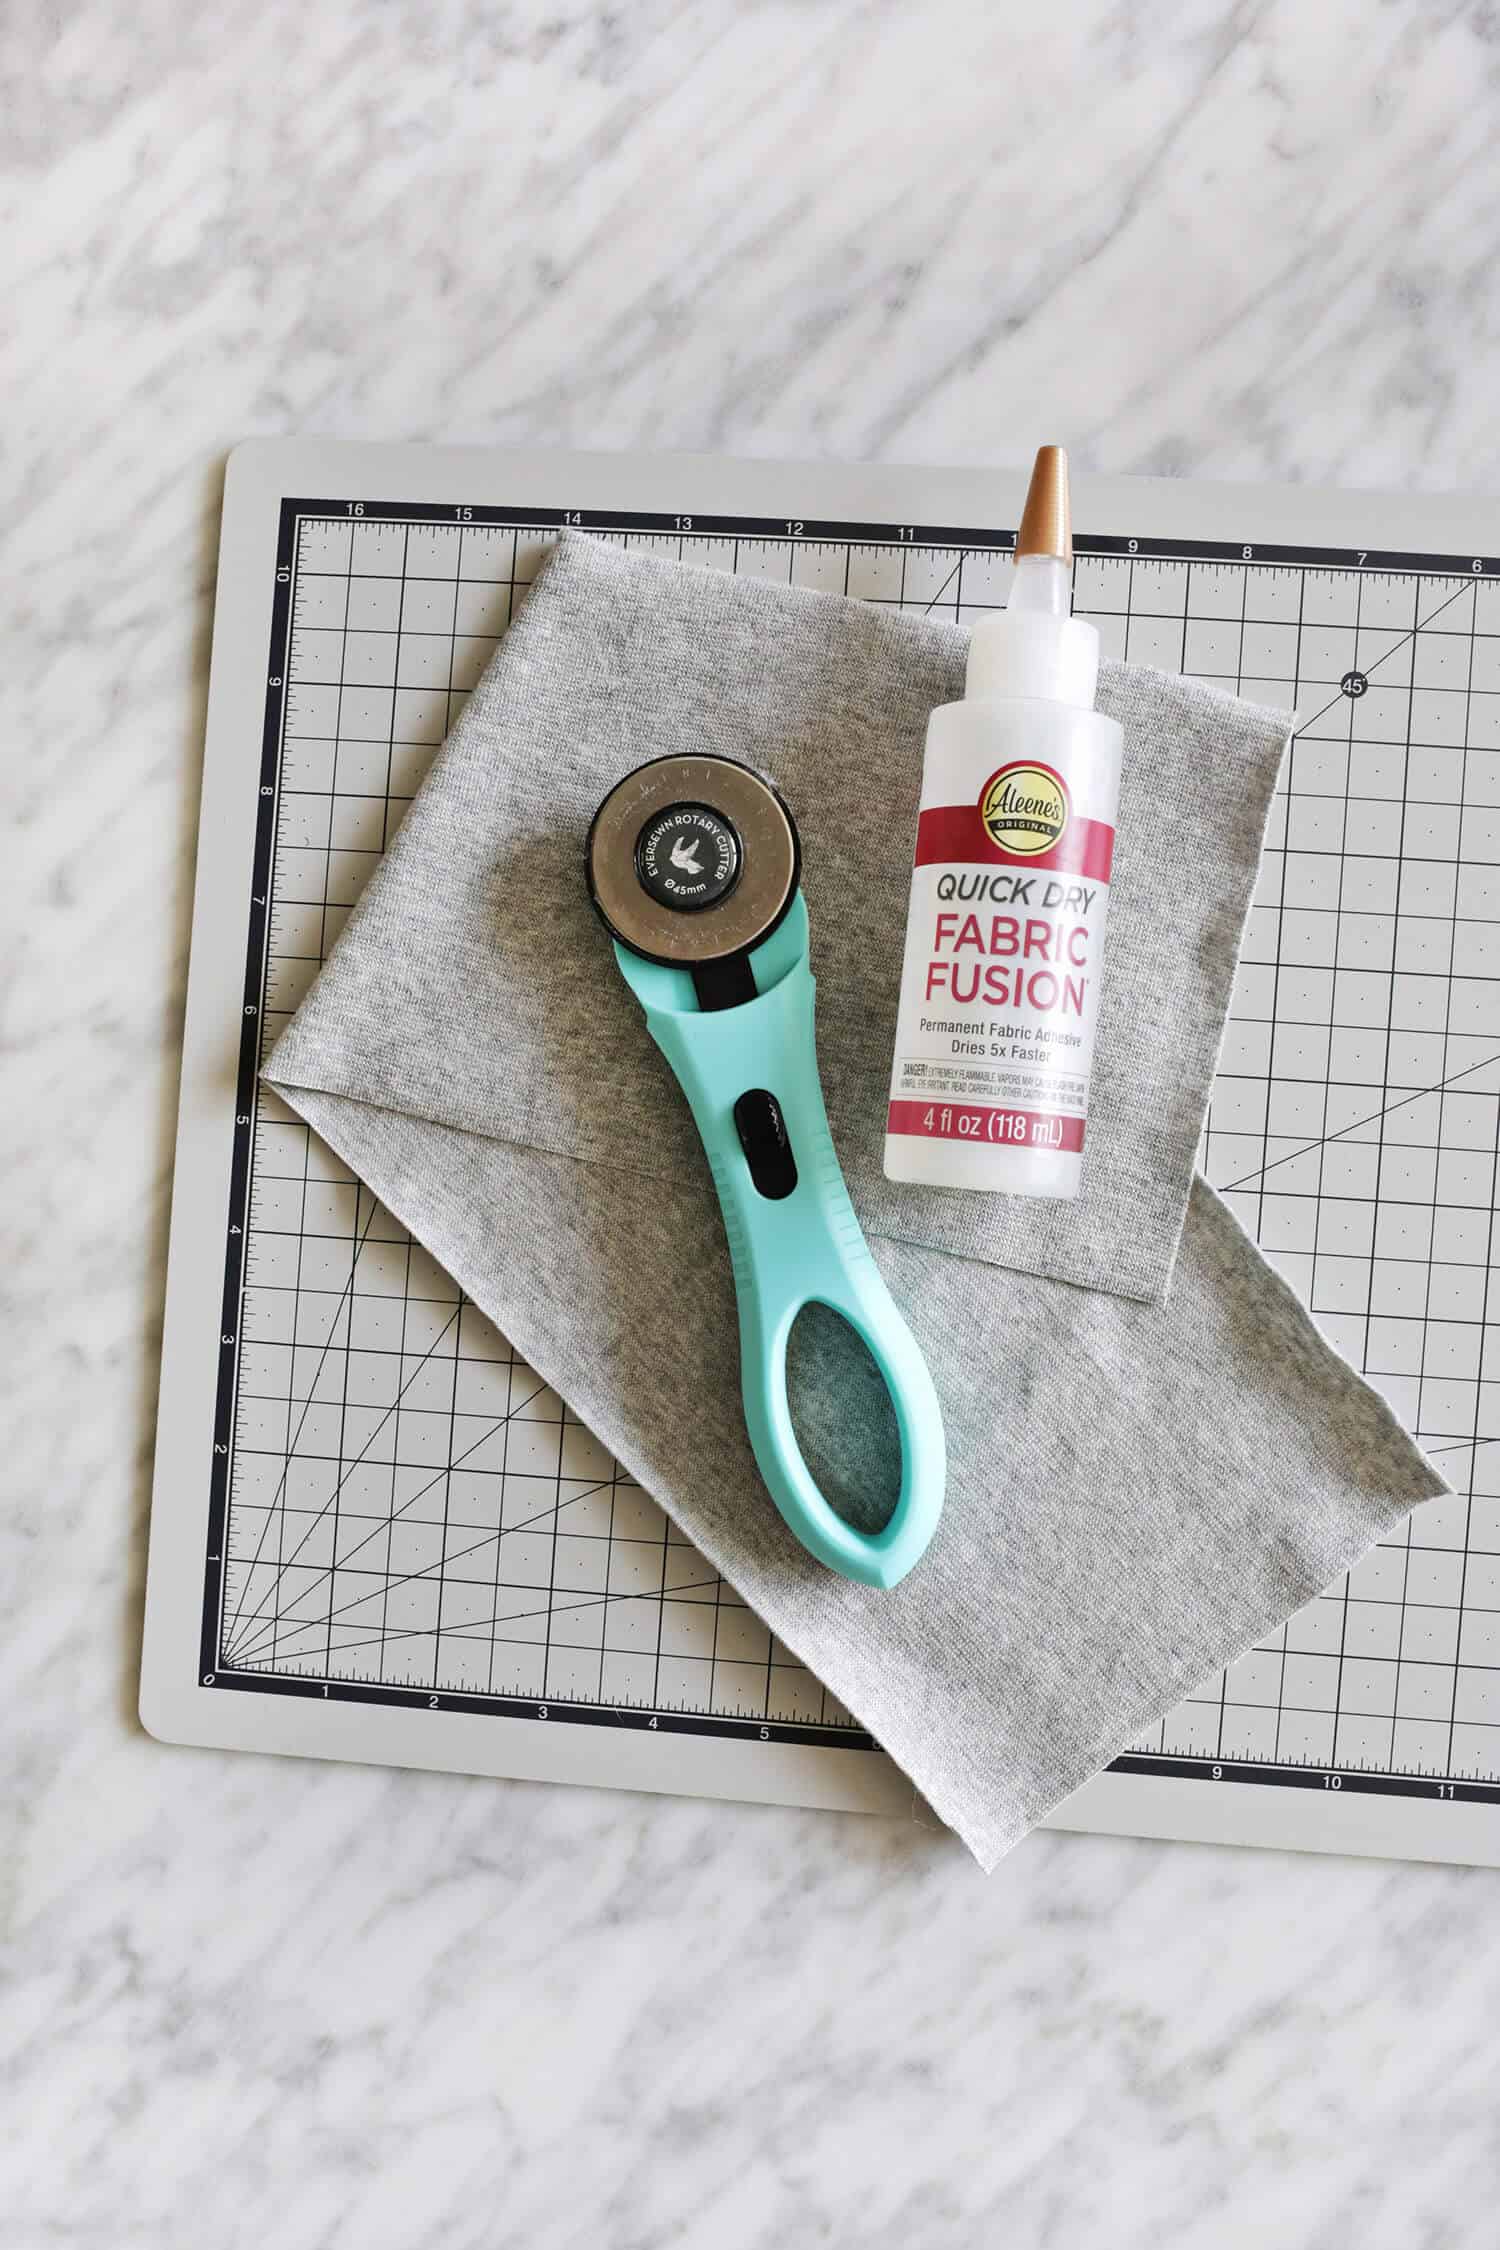 fabric glue and rotary cutter